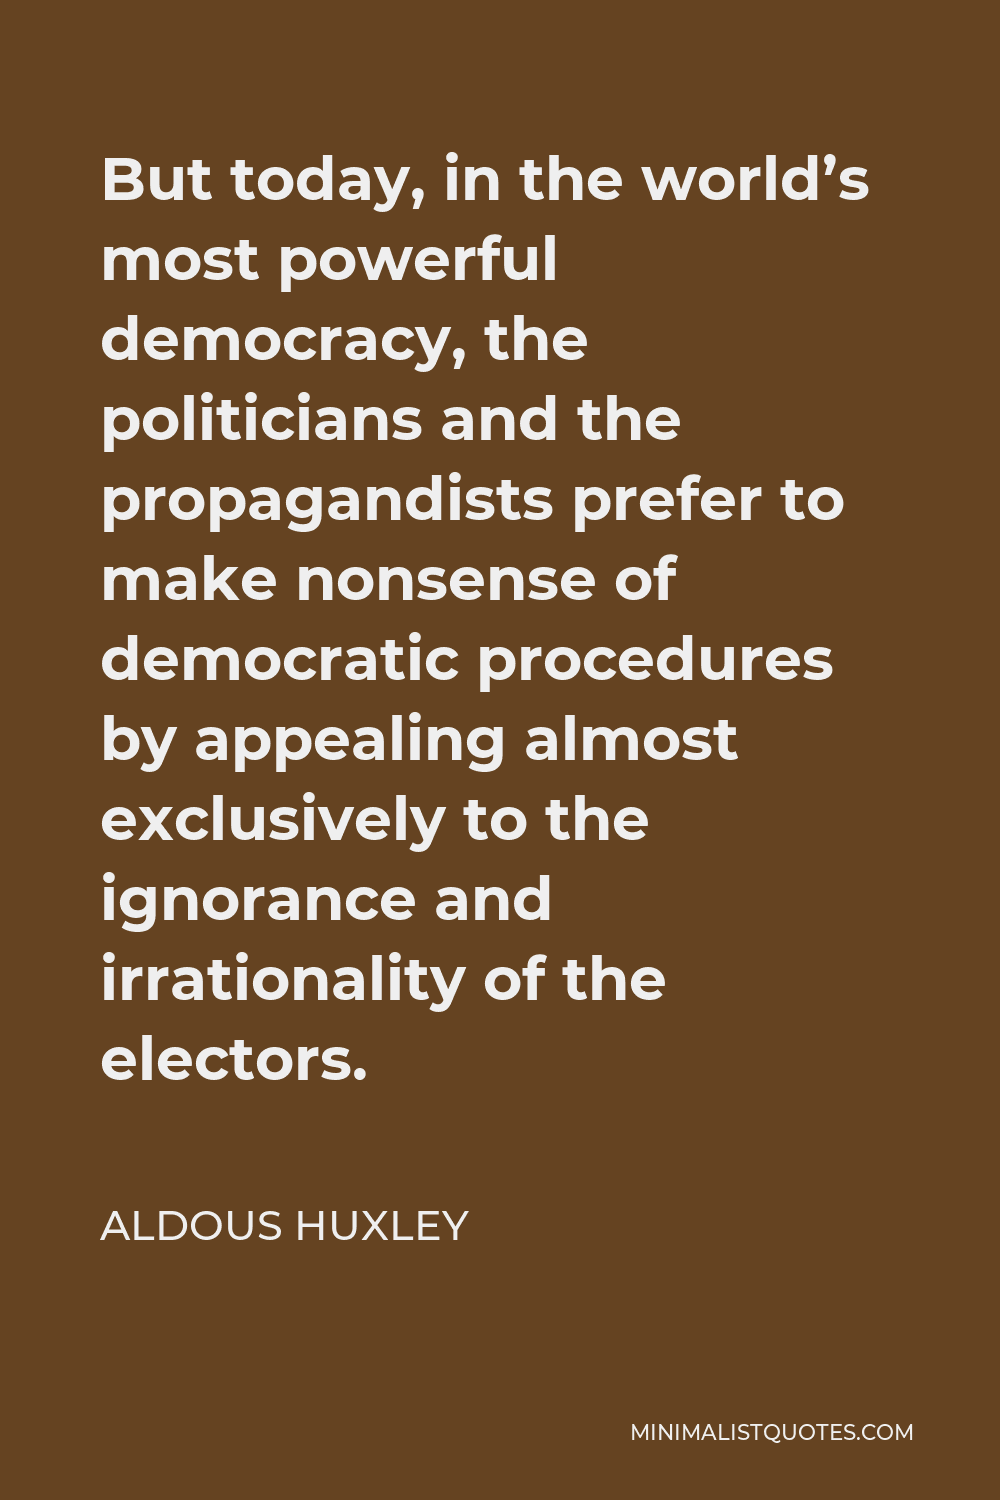 Aldous Huxley Quote - But today, in the world’s most powerful democracy, the politicians and the propagandists prefer to make nonsense of democratic procedures by appealing almost exclusively to the ignorance and irrationality of the electors.